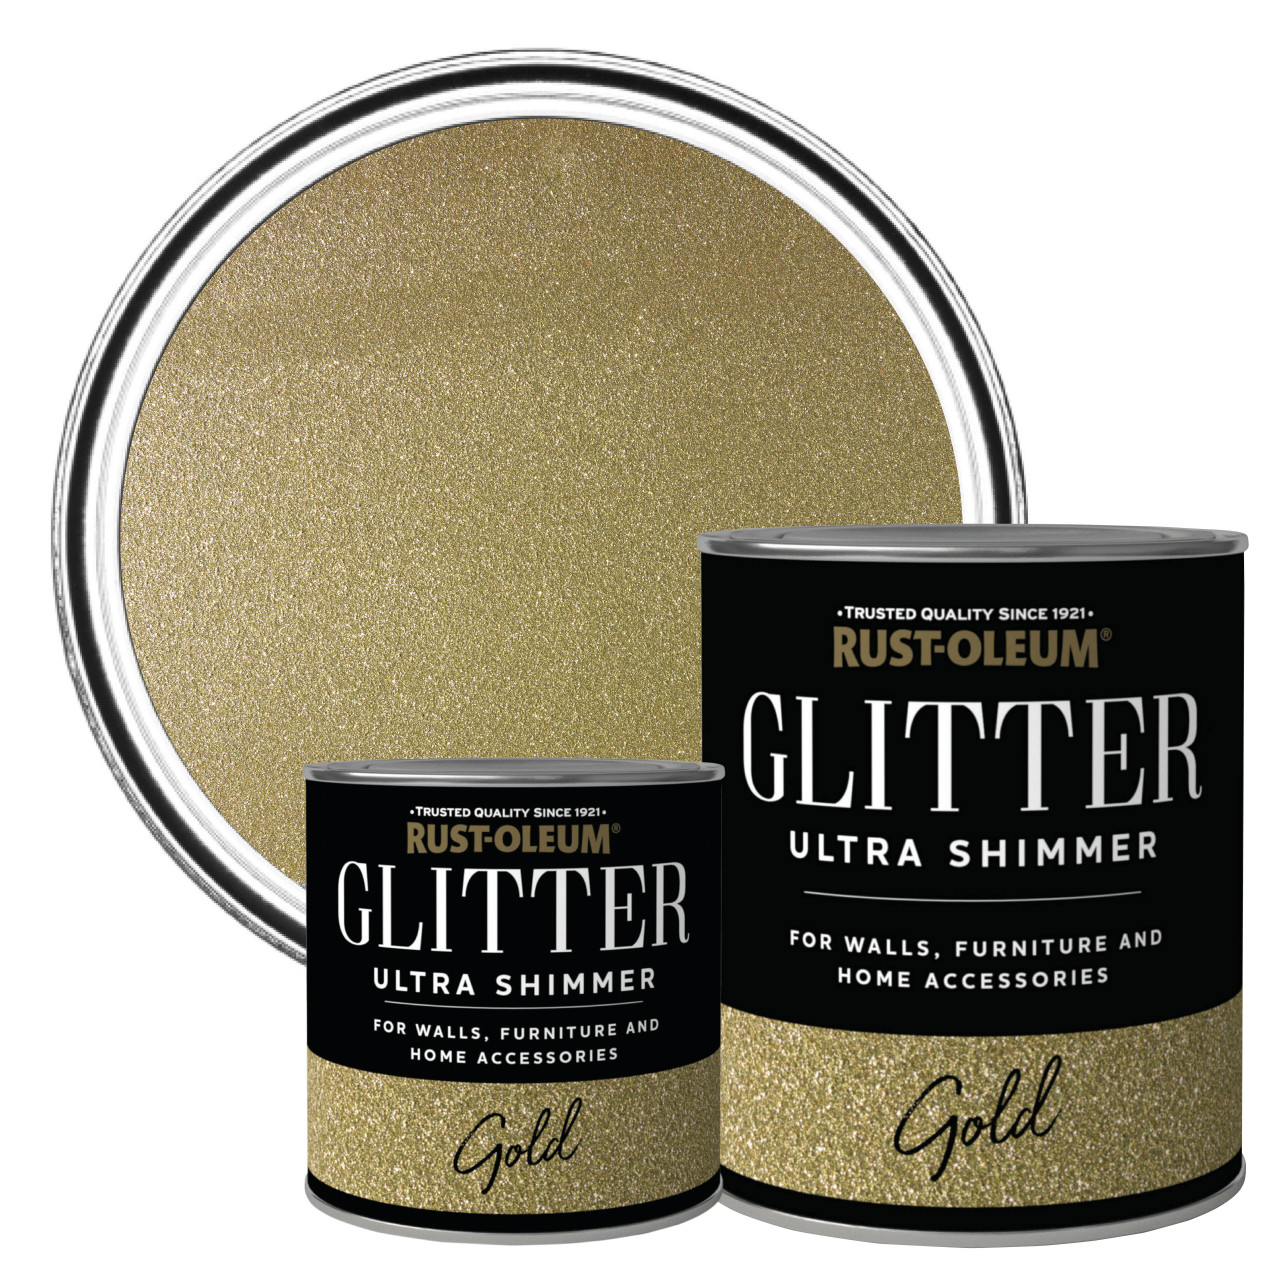 Rustoleum Glitter Clear does not have glitter in it! 